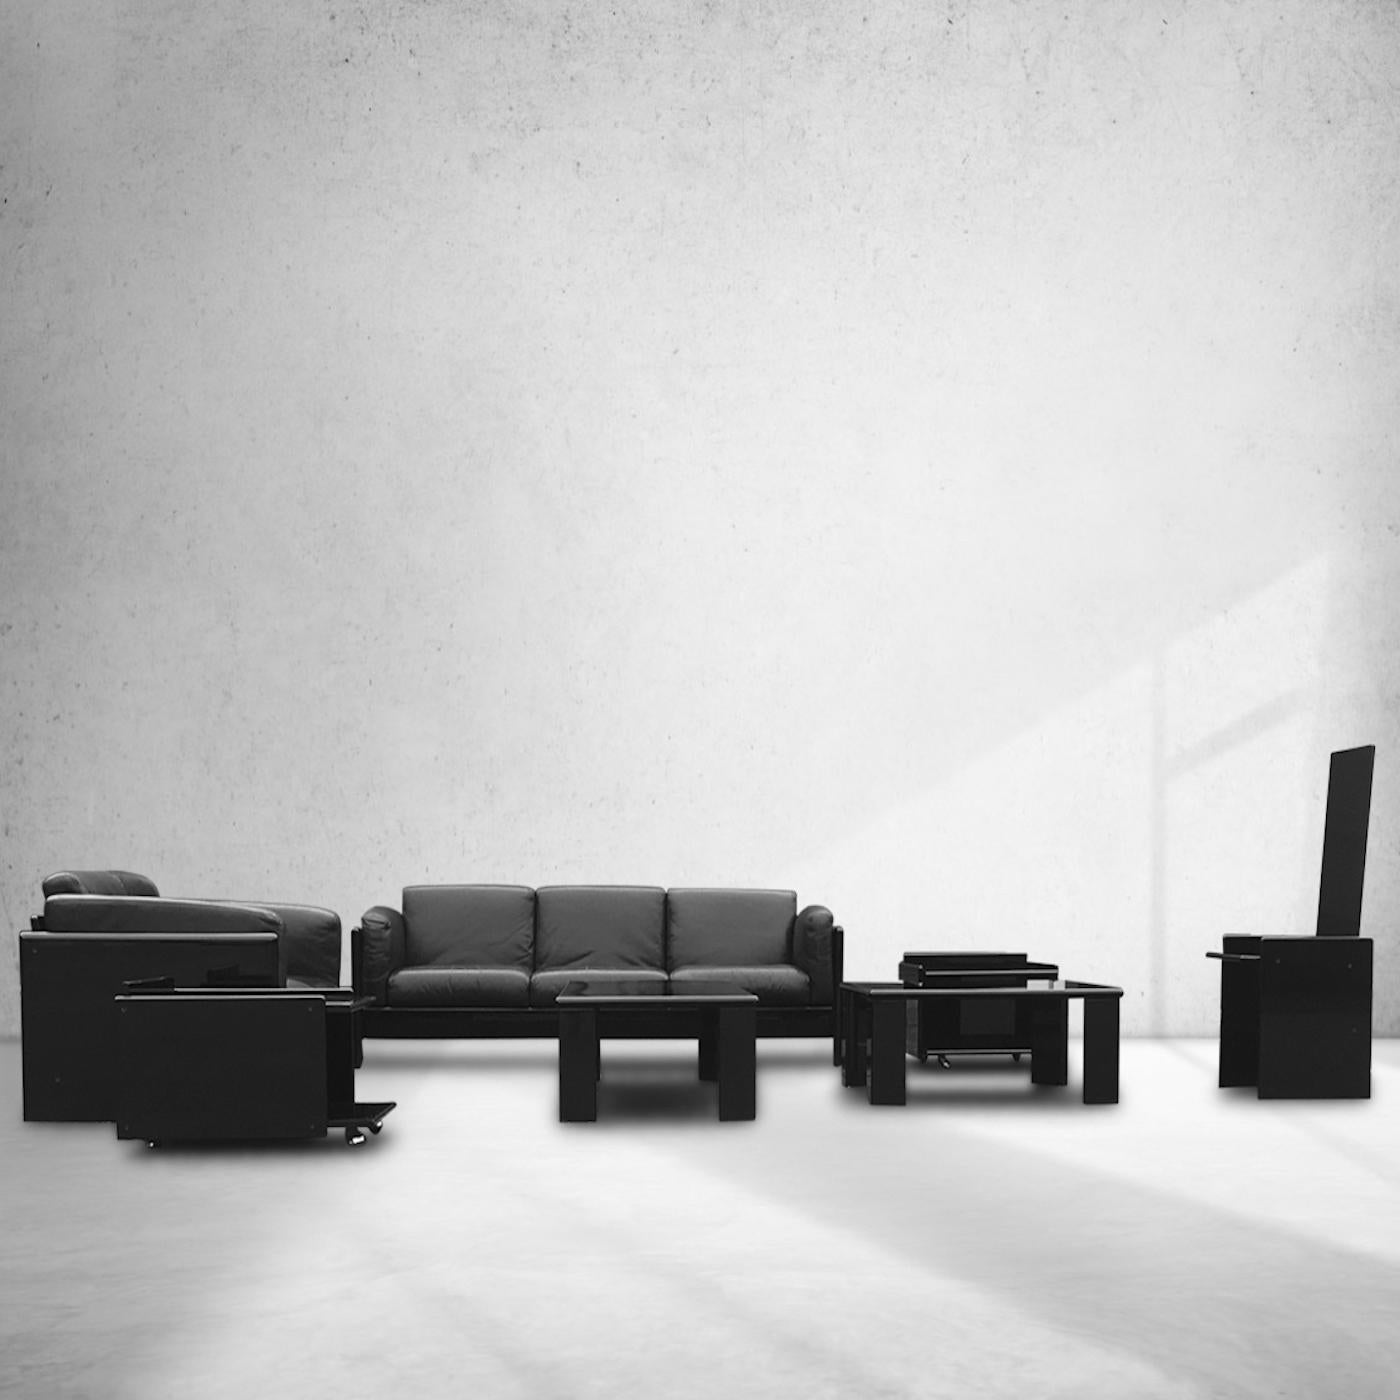 Set of 8 matching pieces for Simon Gavina International.

The set consists of 8 different pieces;
– 2x 2-seater sofa Simone by Dino Gavina in lacquered black frame and leather
– 1x 3-seater sofa Simone by Dino Gavina in lacquered black frame and